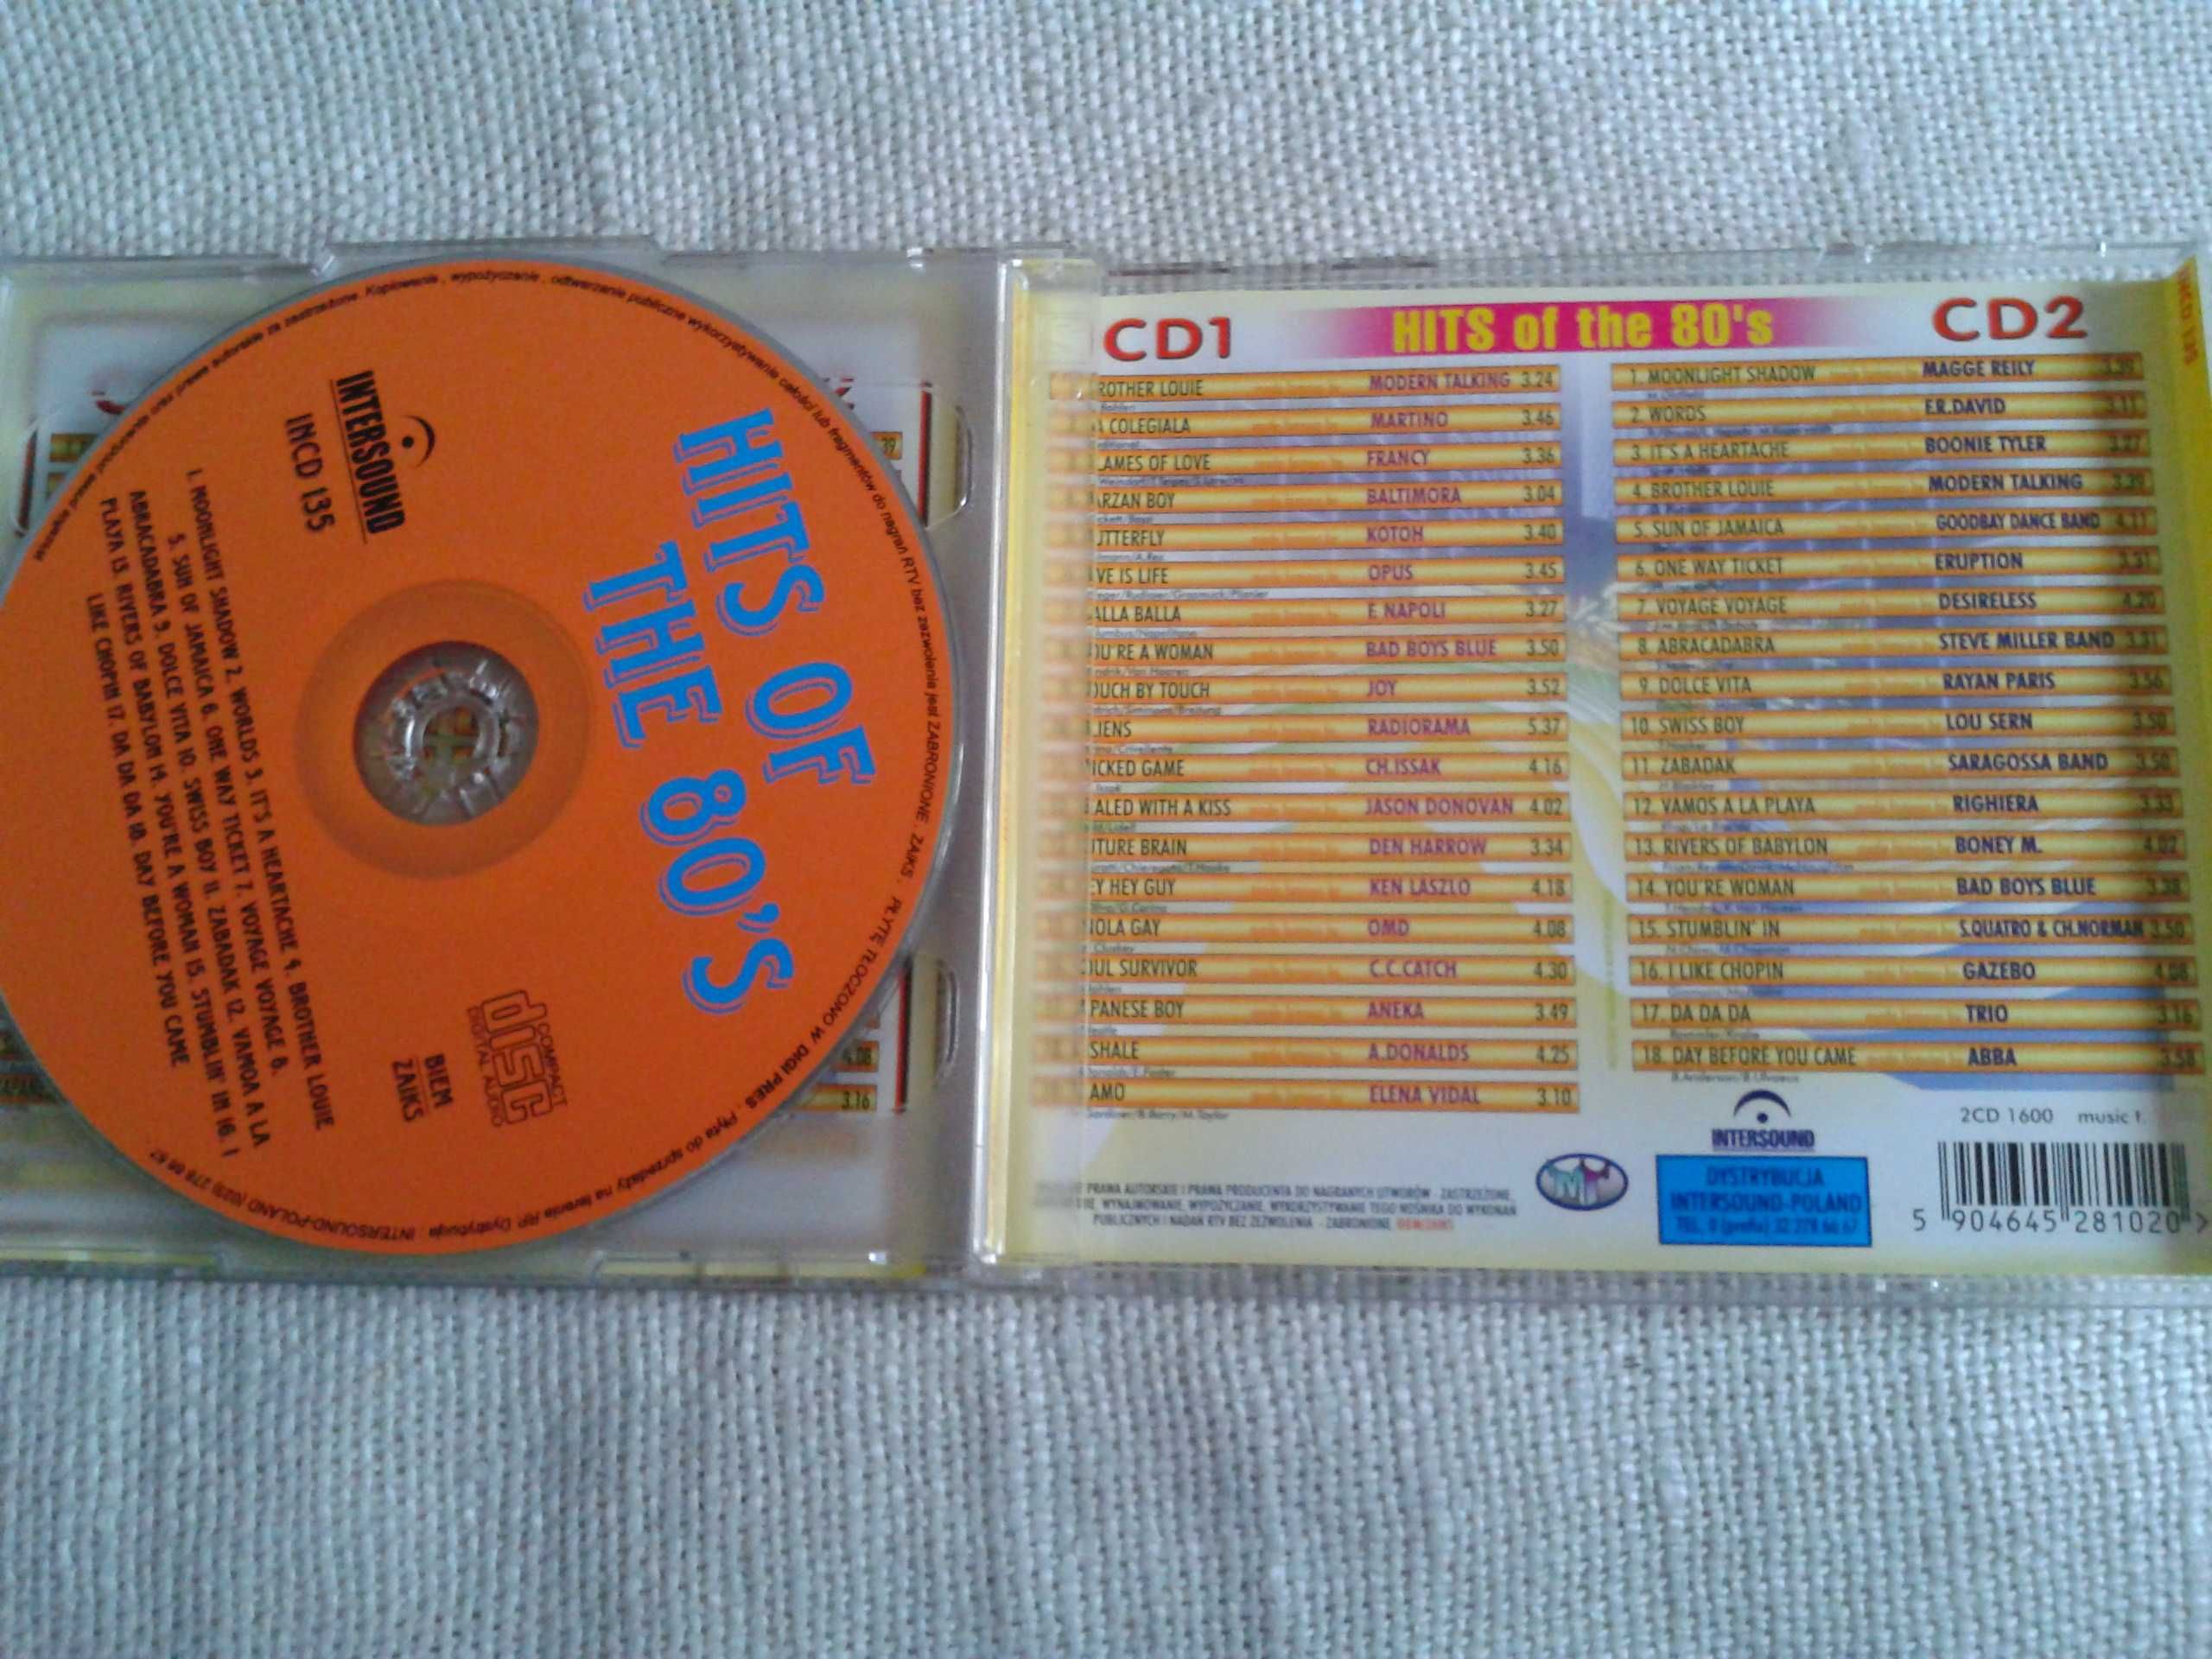 Hits Of The 80's  2CD